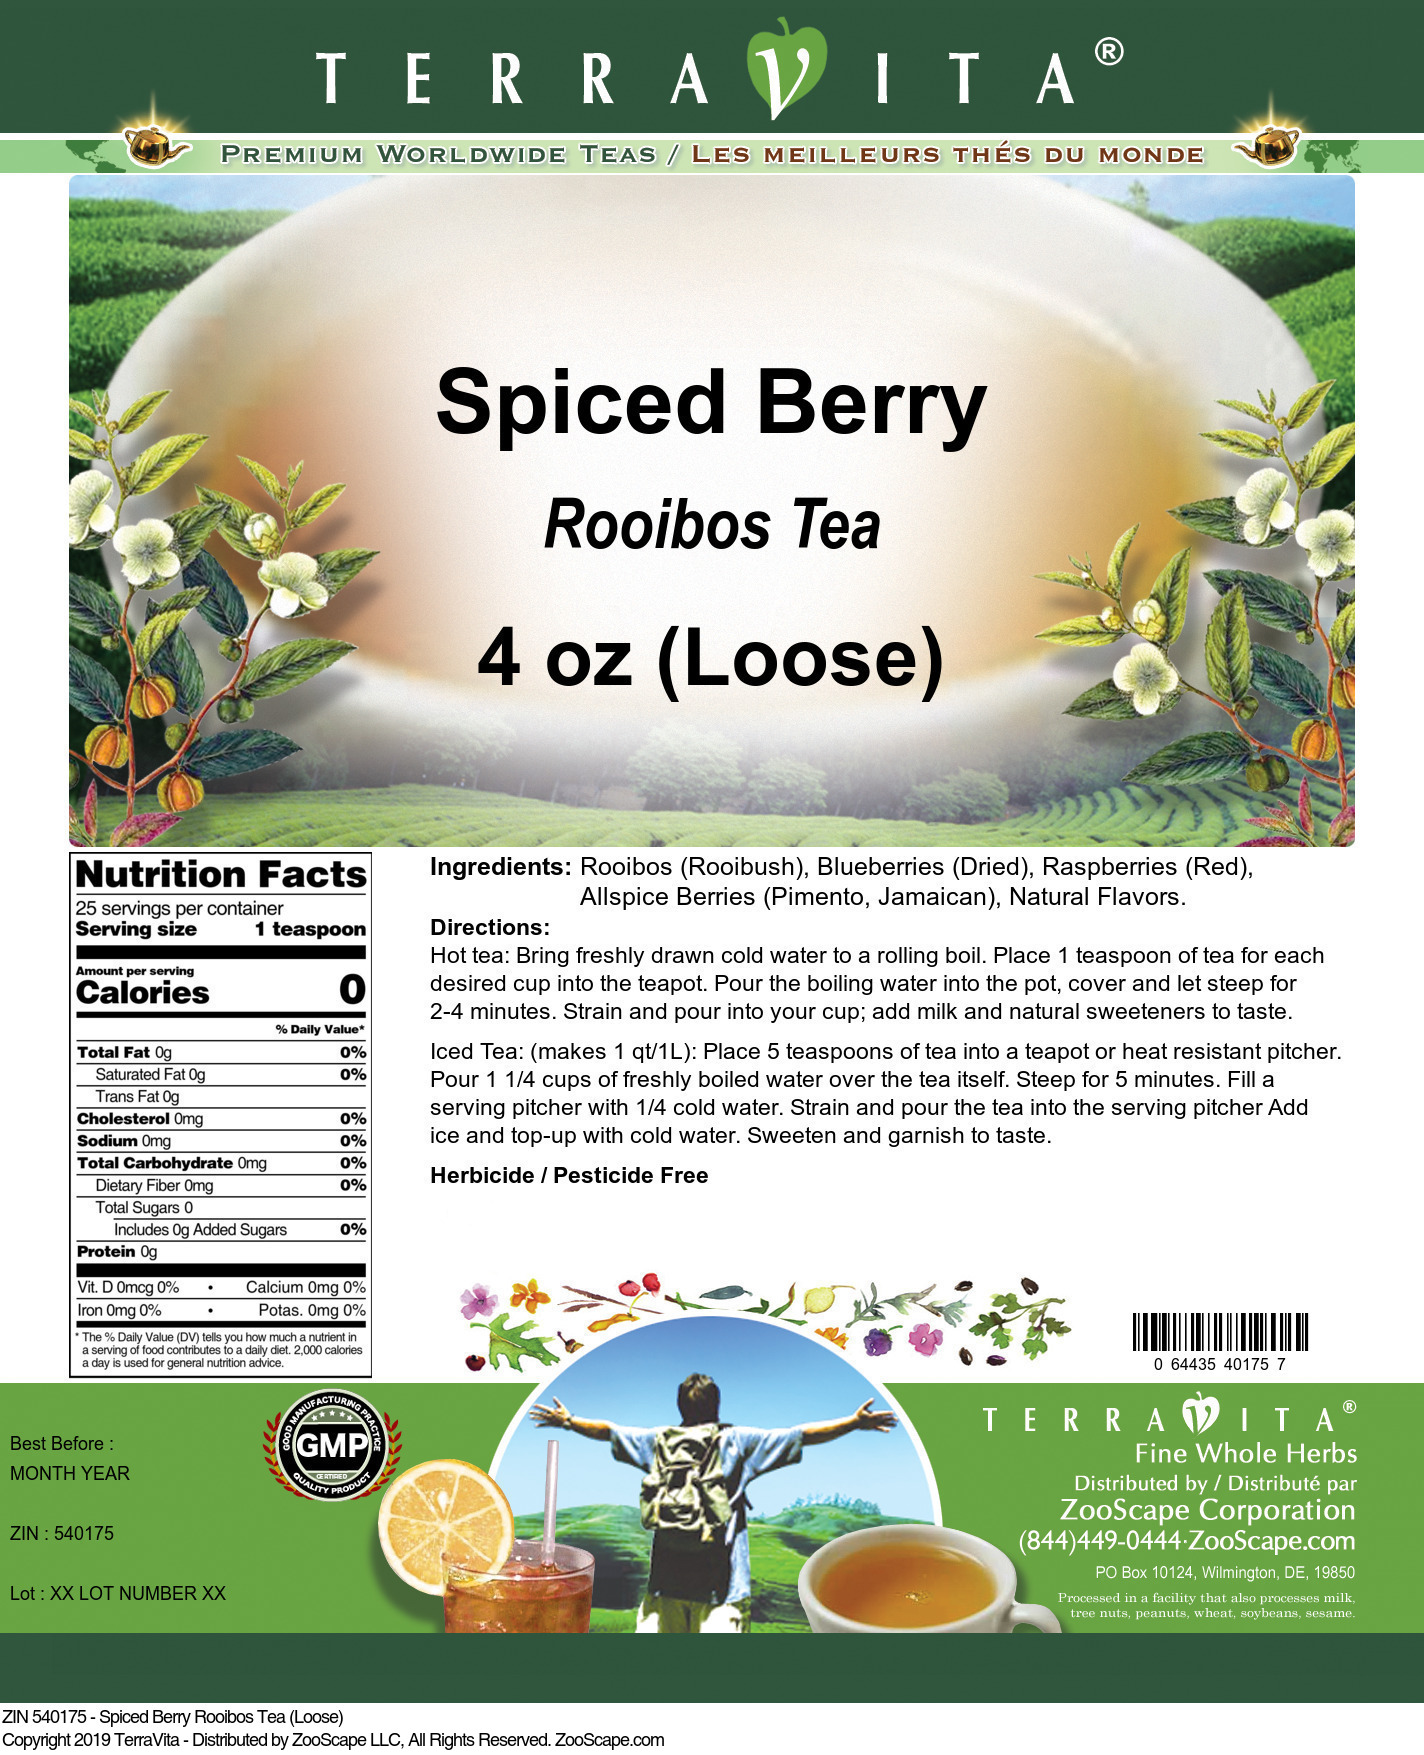 Spiced Berry Rooibos Tea (Loose) - Label